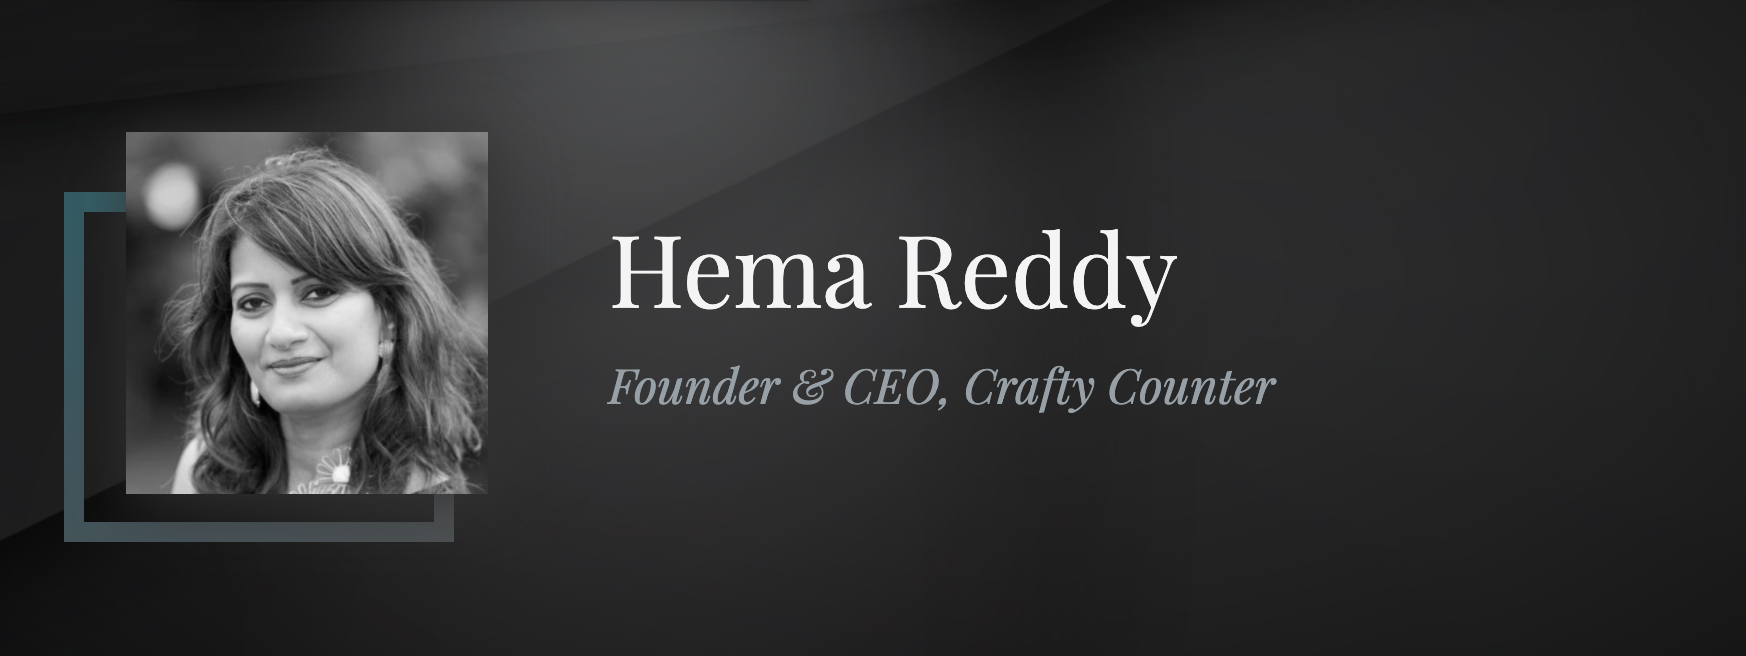 Founder Hema Reddy's Feature on The Native Influence